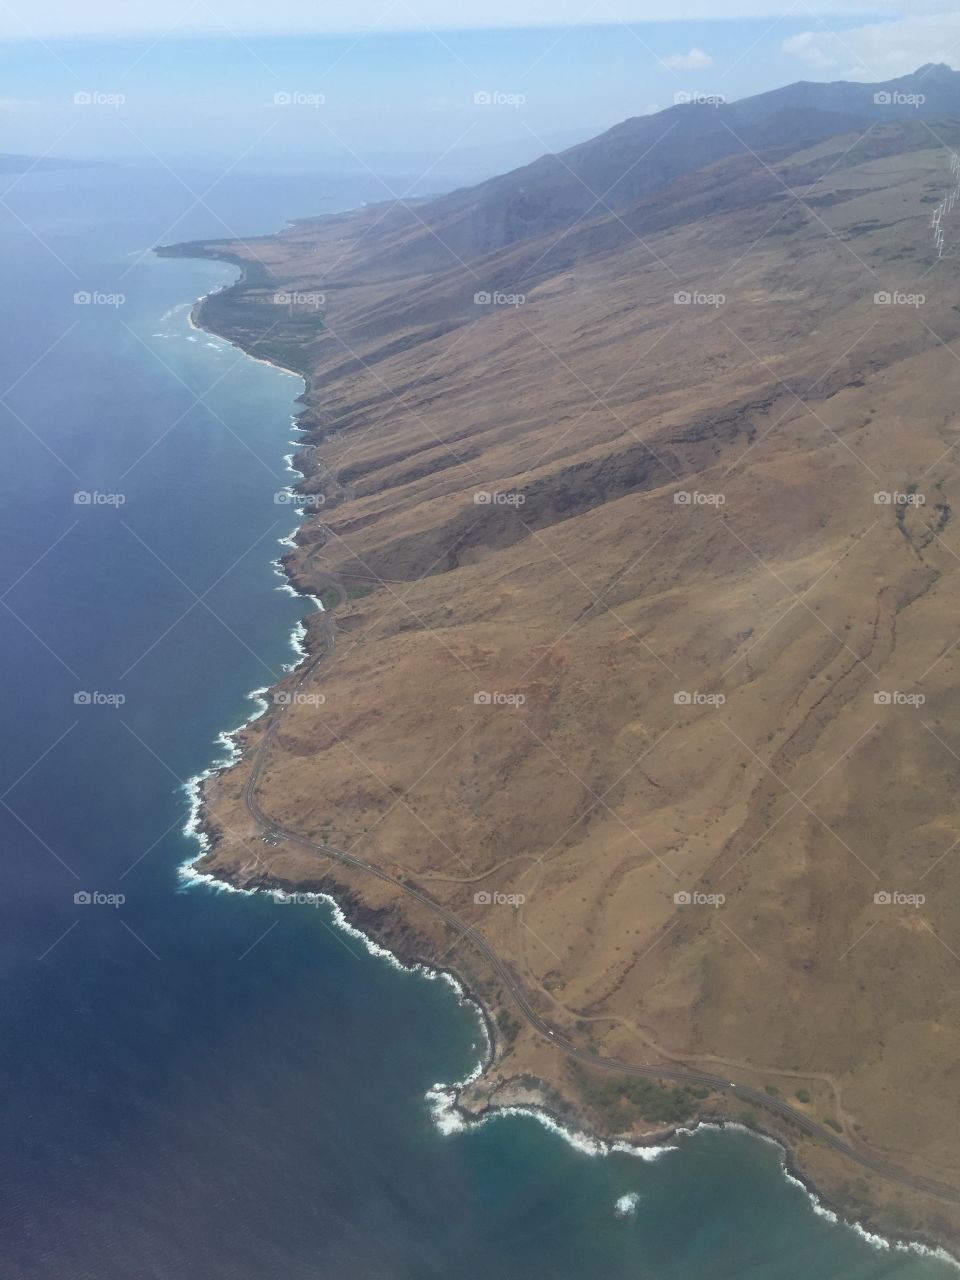 Maui from the sky 